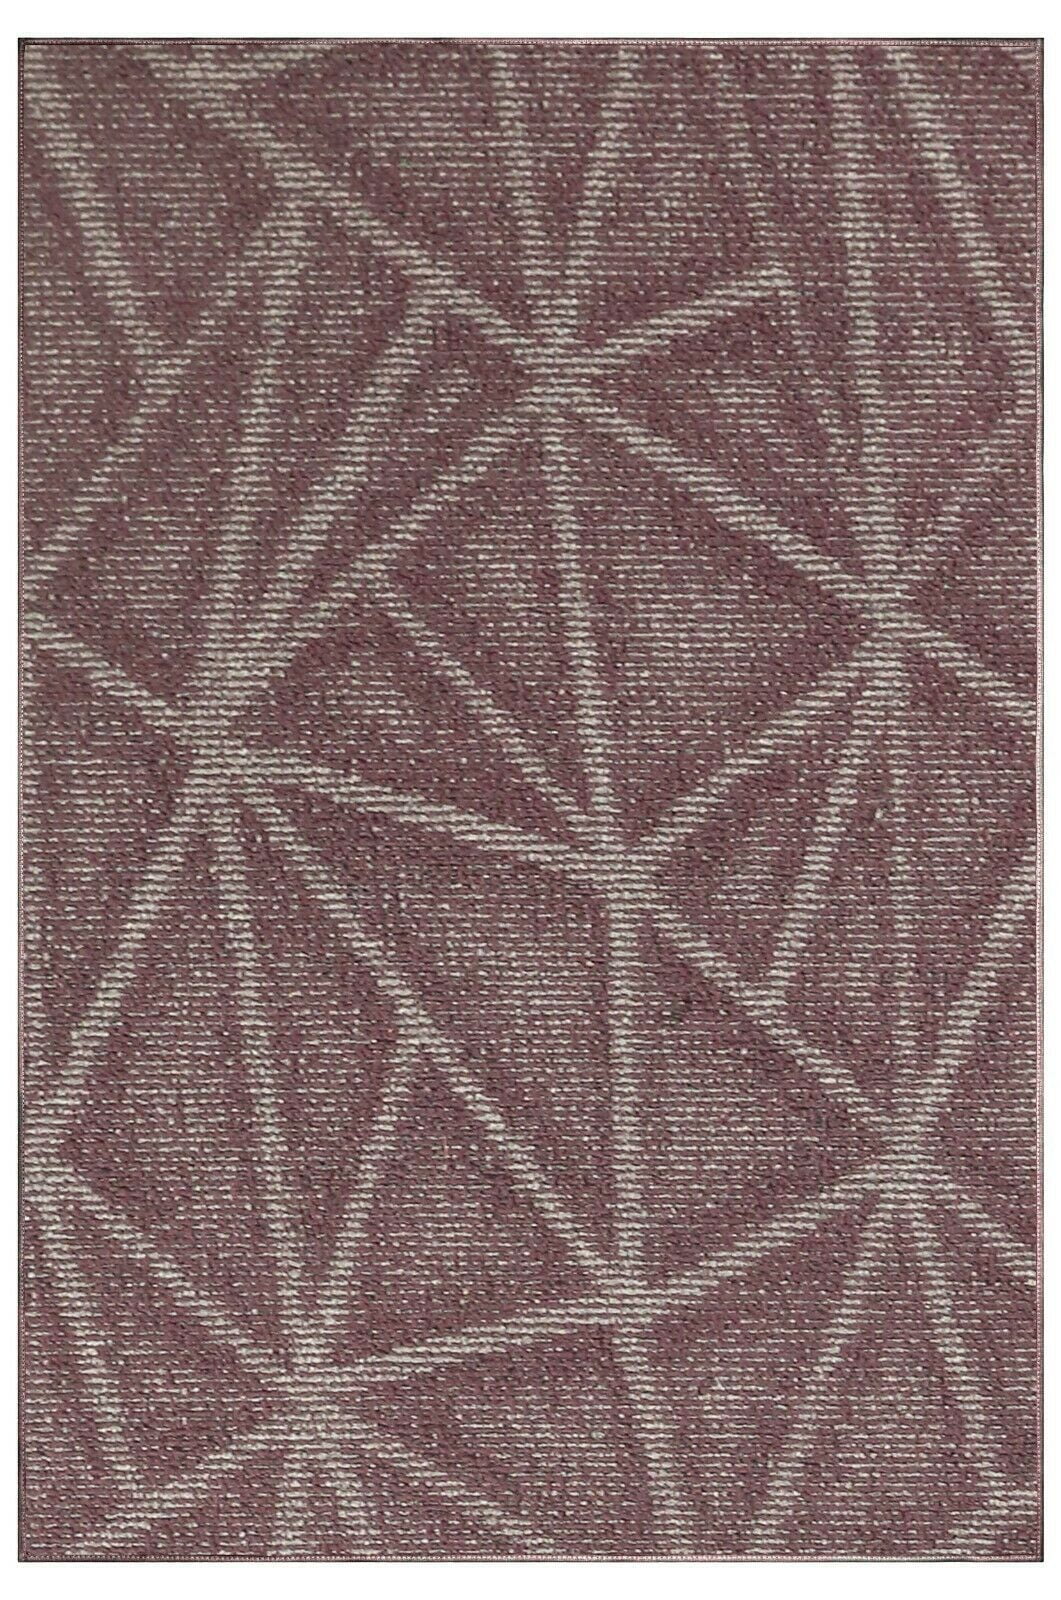 Area Rugs Wedding Made in USA Pets Pet and Kids Friendly Rug Rectangle Purple Modern Indoor/Outdoor Commercial Rug